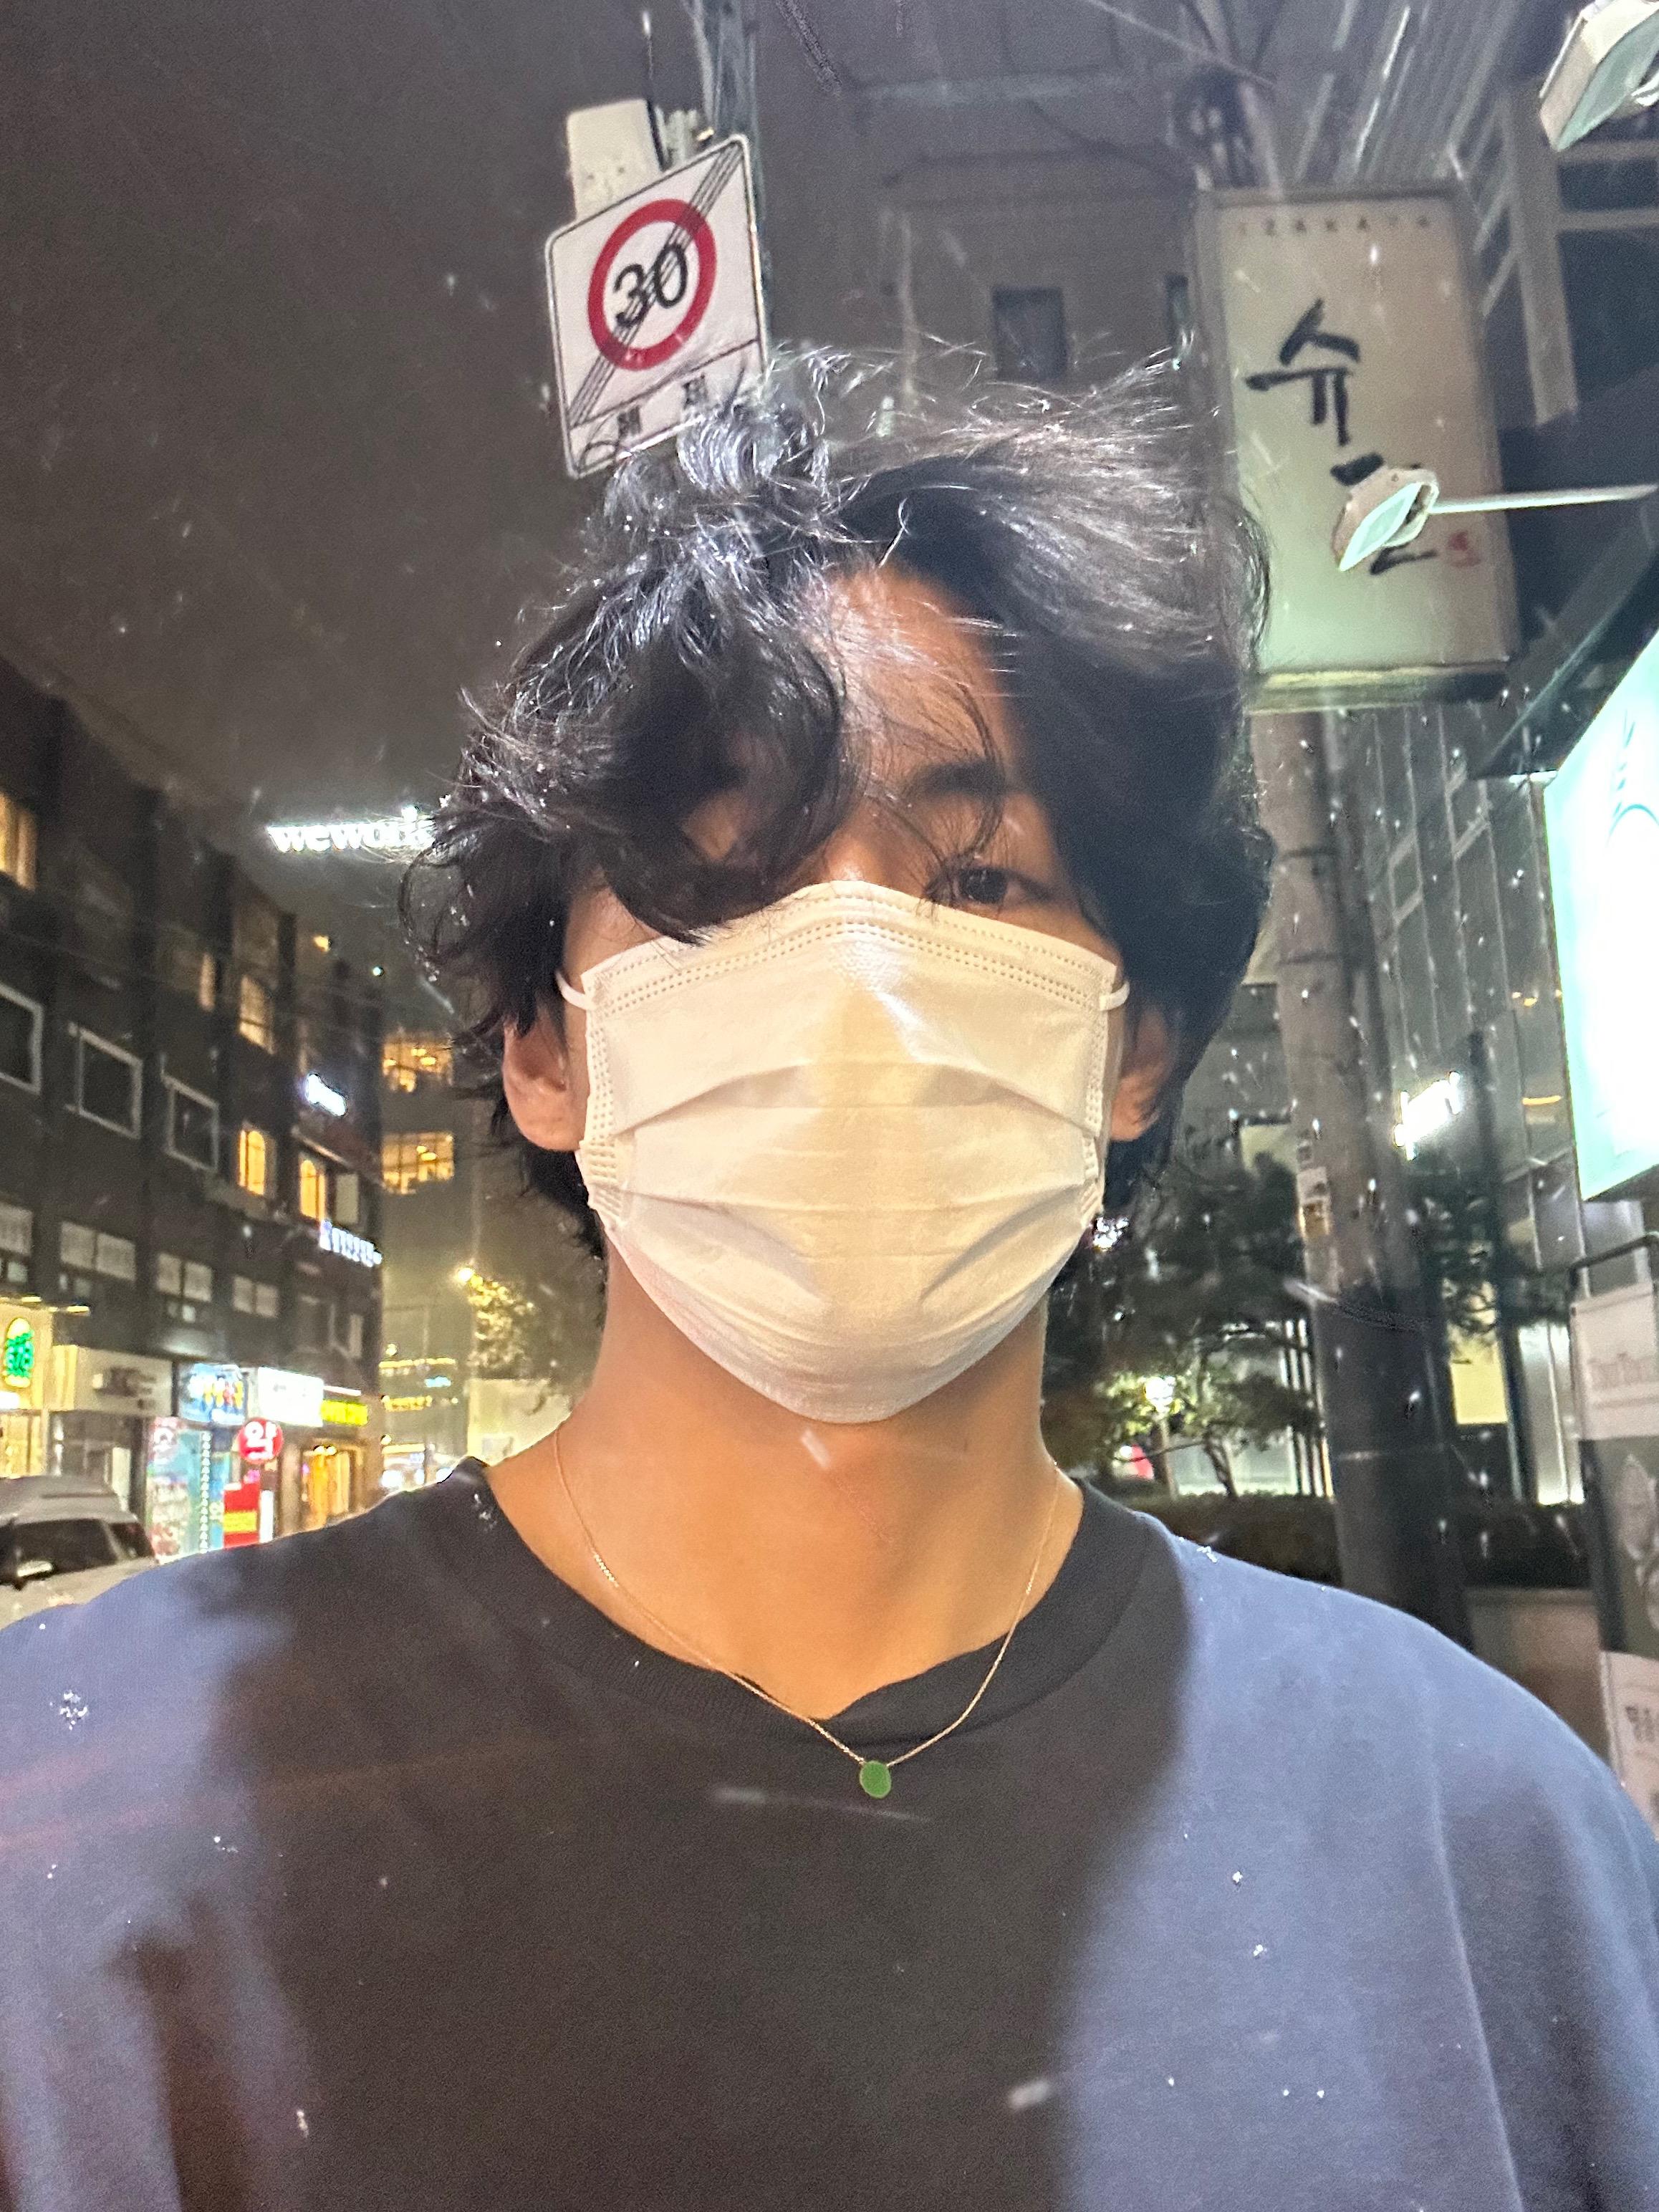 V posted another selfie of himself on the streets of Seoul probably. ARMYs will have to wait for 18 months while he completes his military service